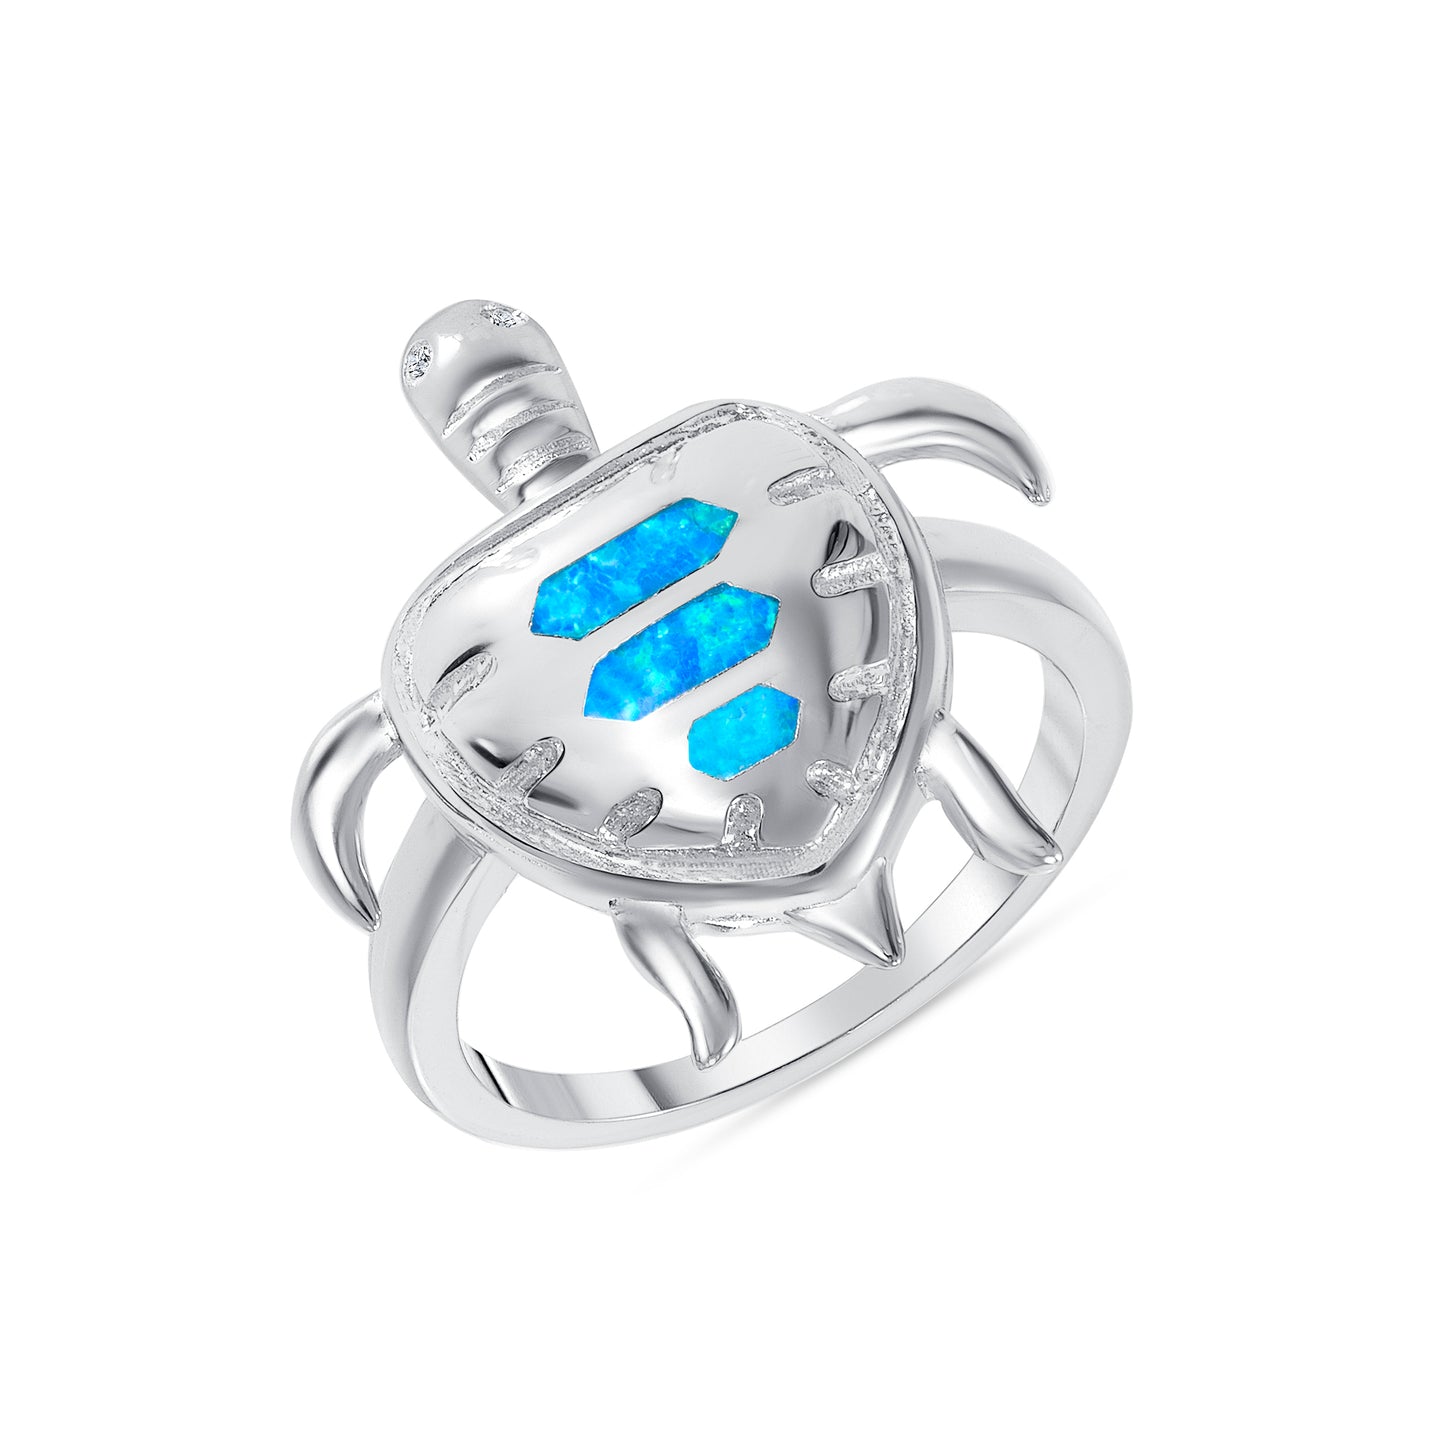 Silver 925 Rhodium Plated Ladies Turtle Opal Ring. OPALR1